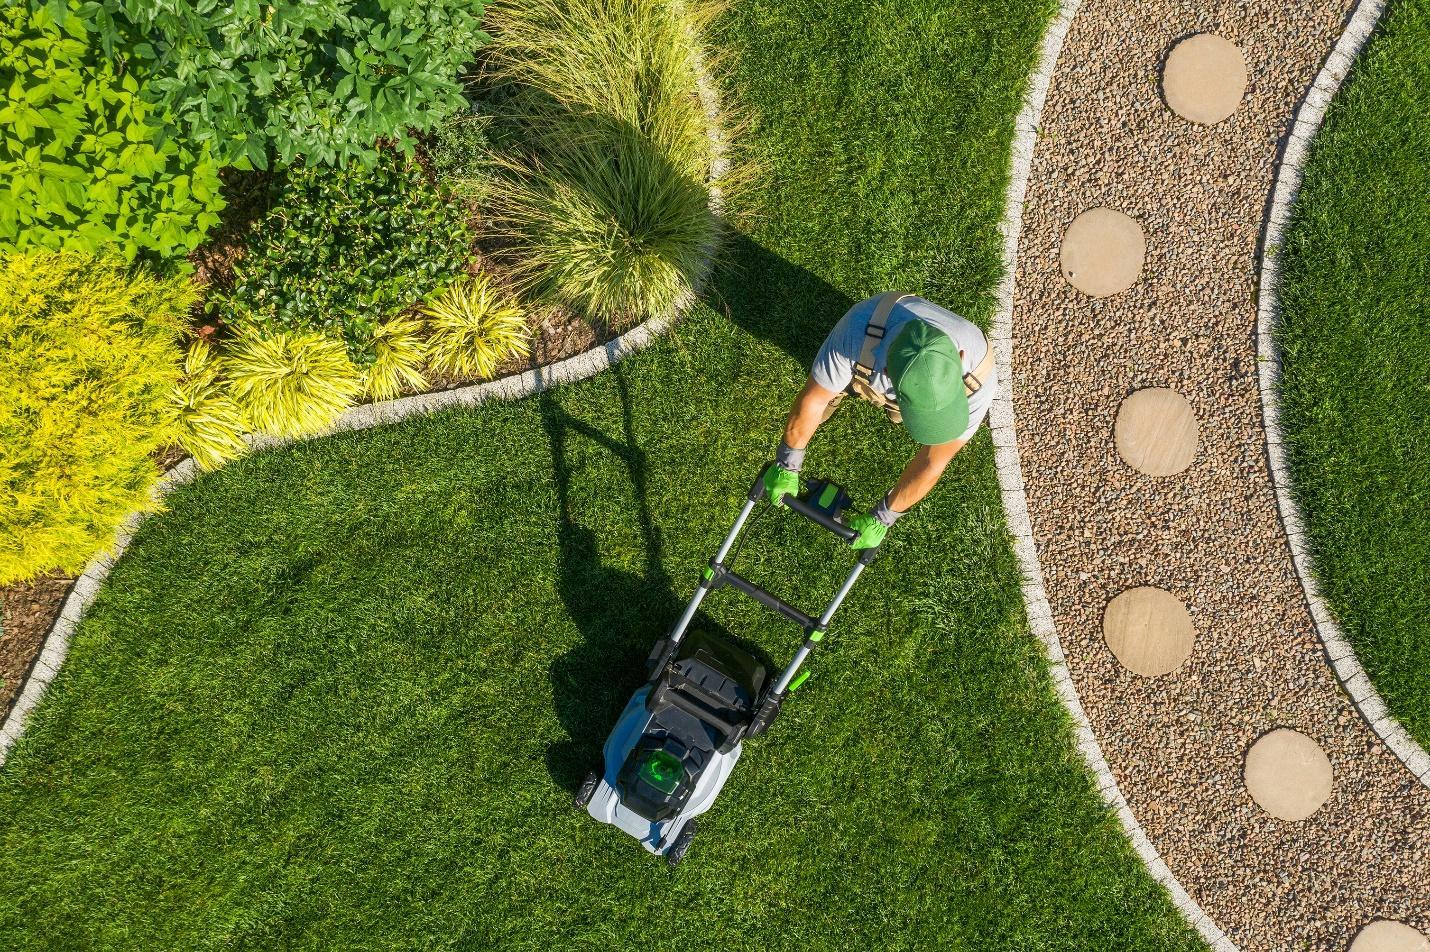 Aerial view of person pushing lawn mower on grass between garden bed and path